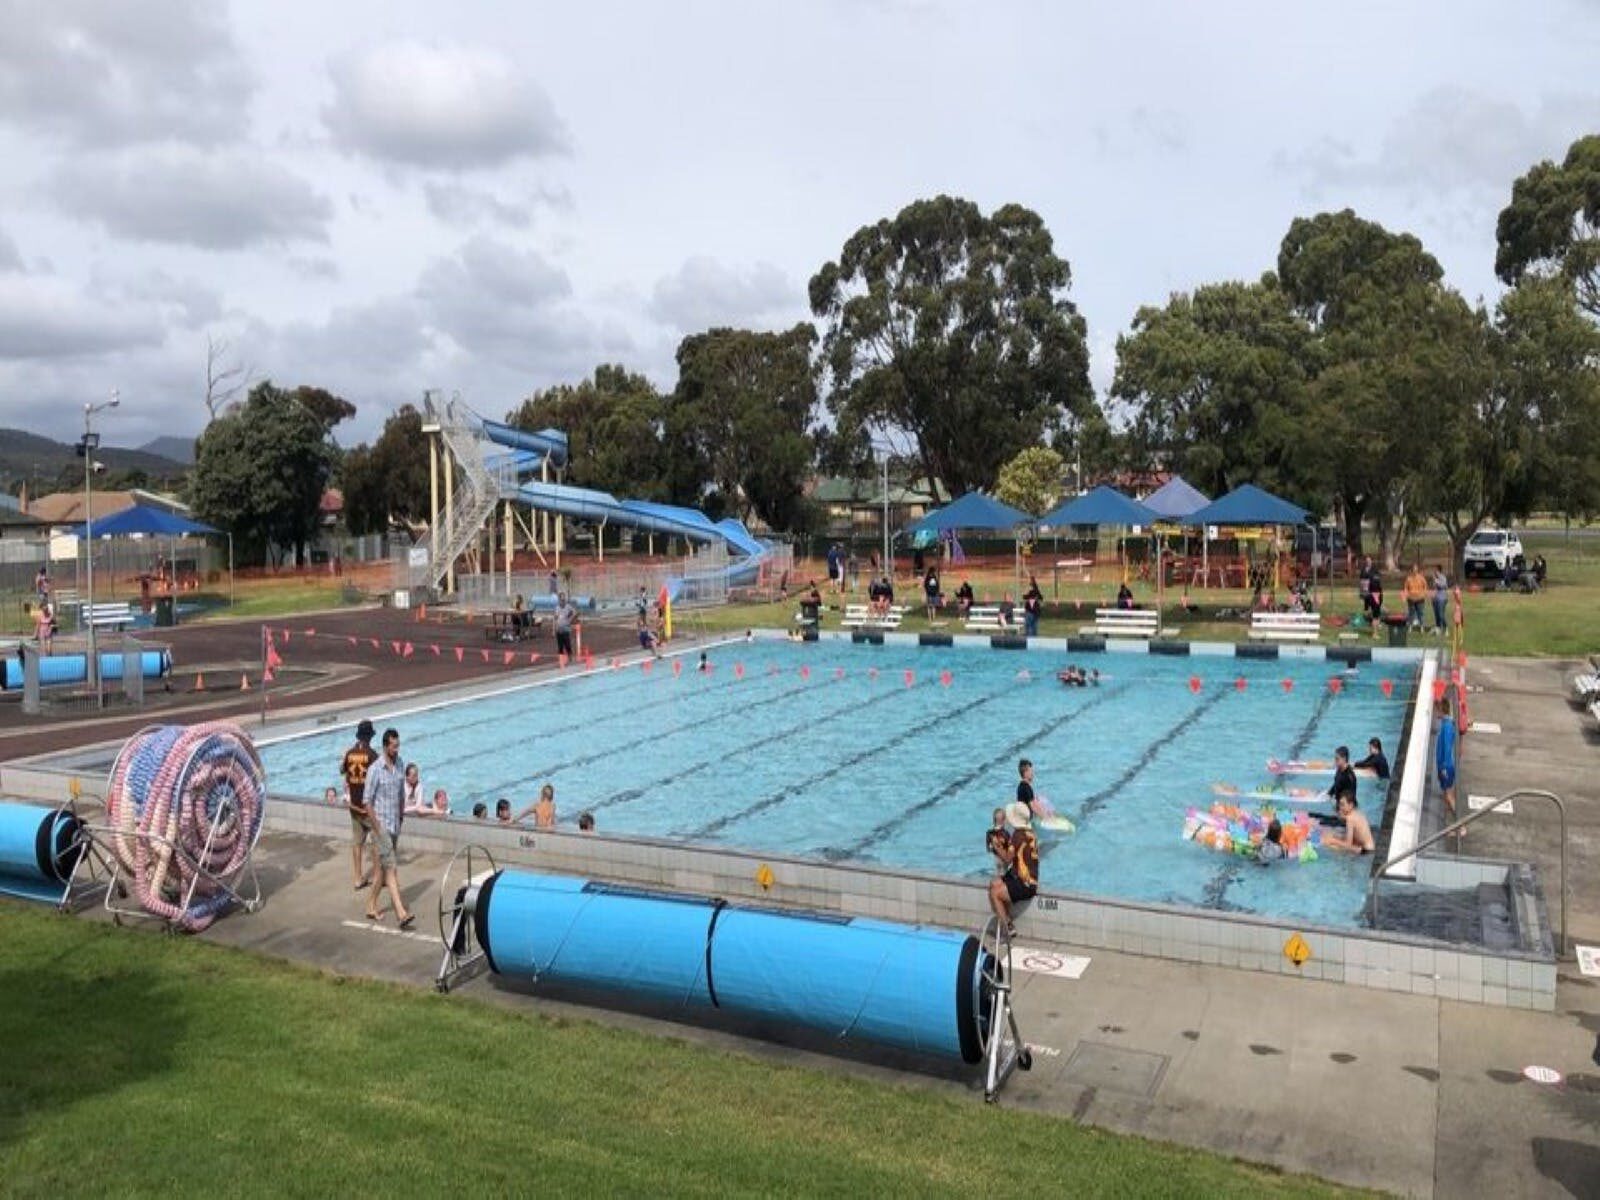 Photo of pool and people swimming